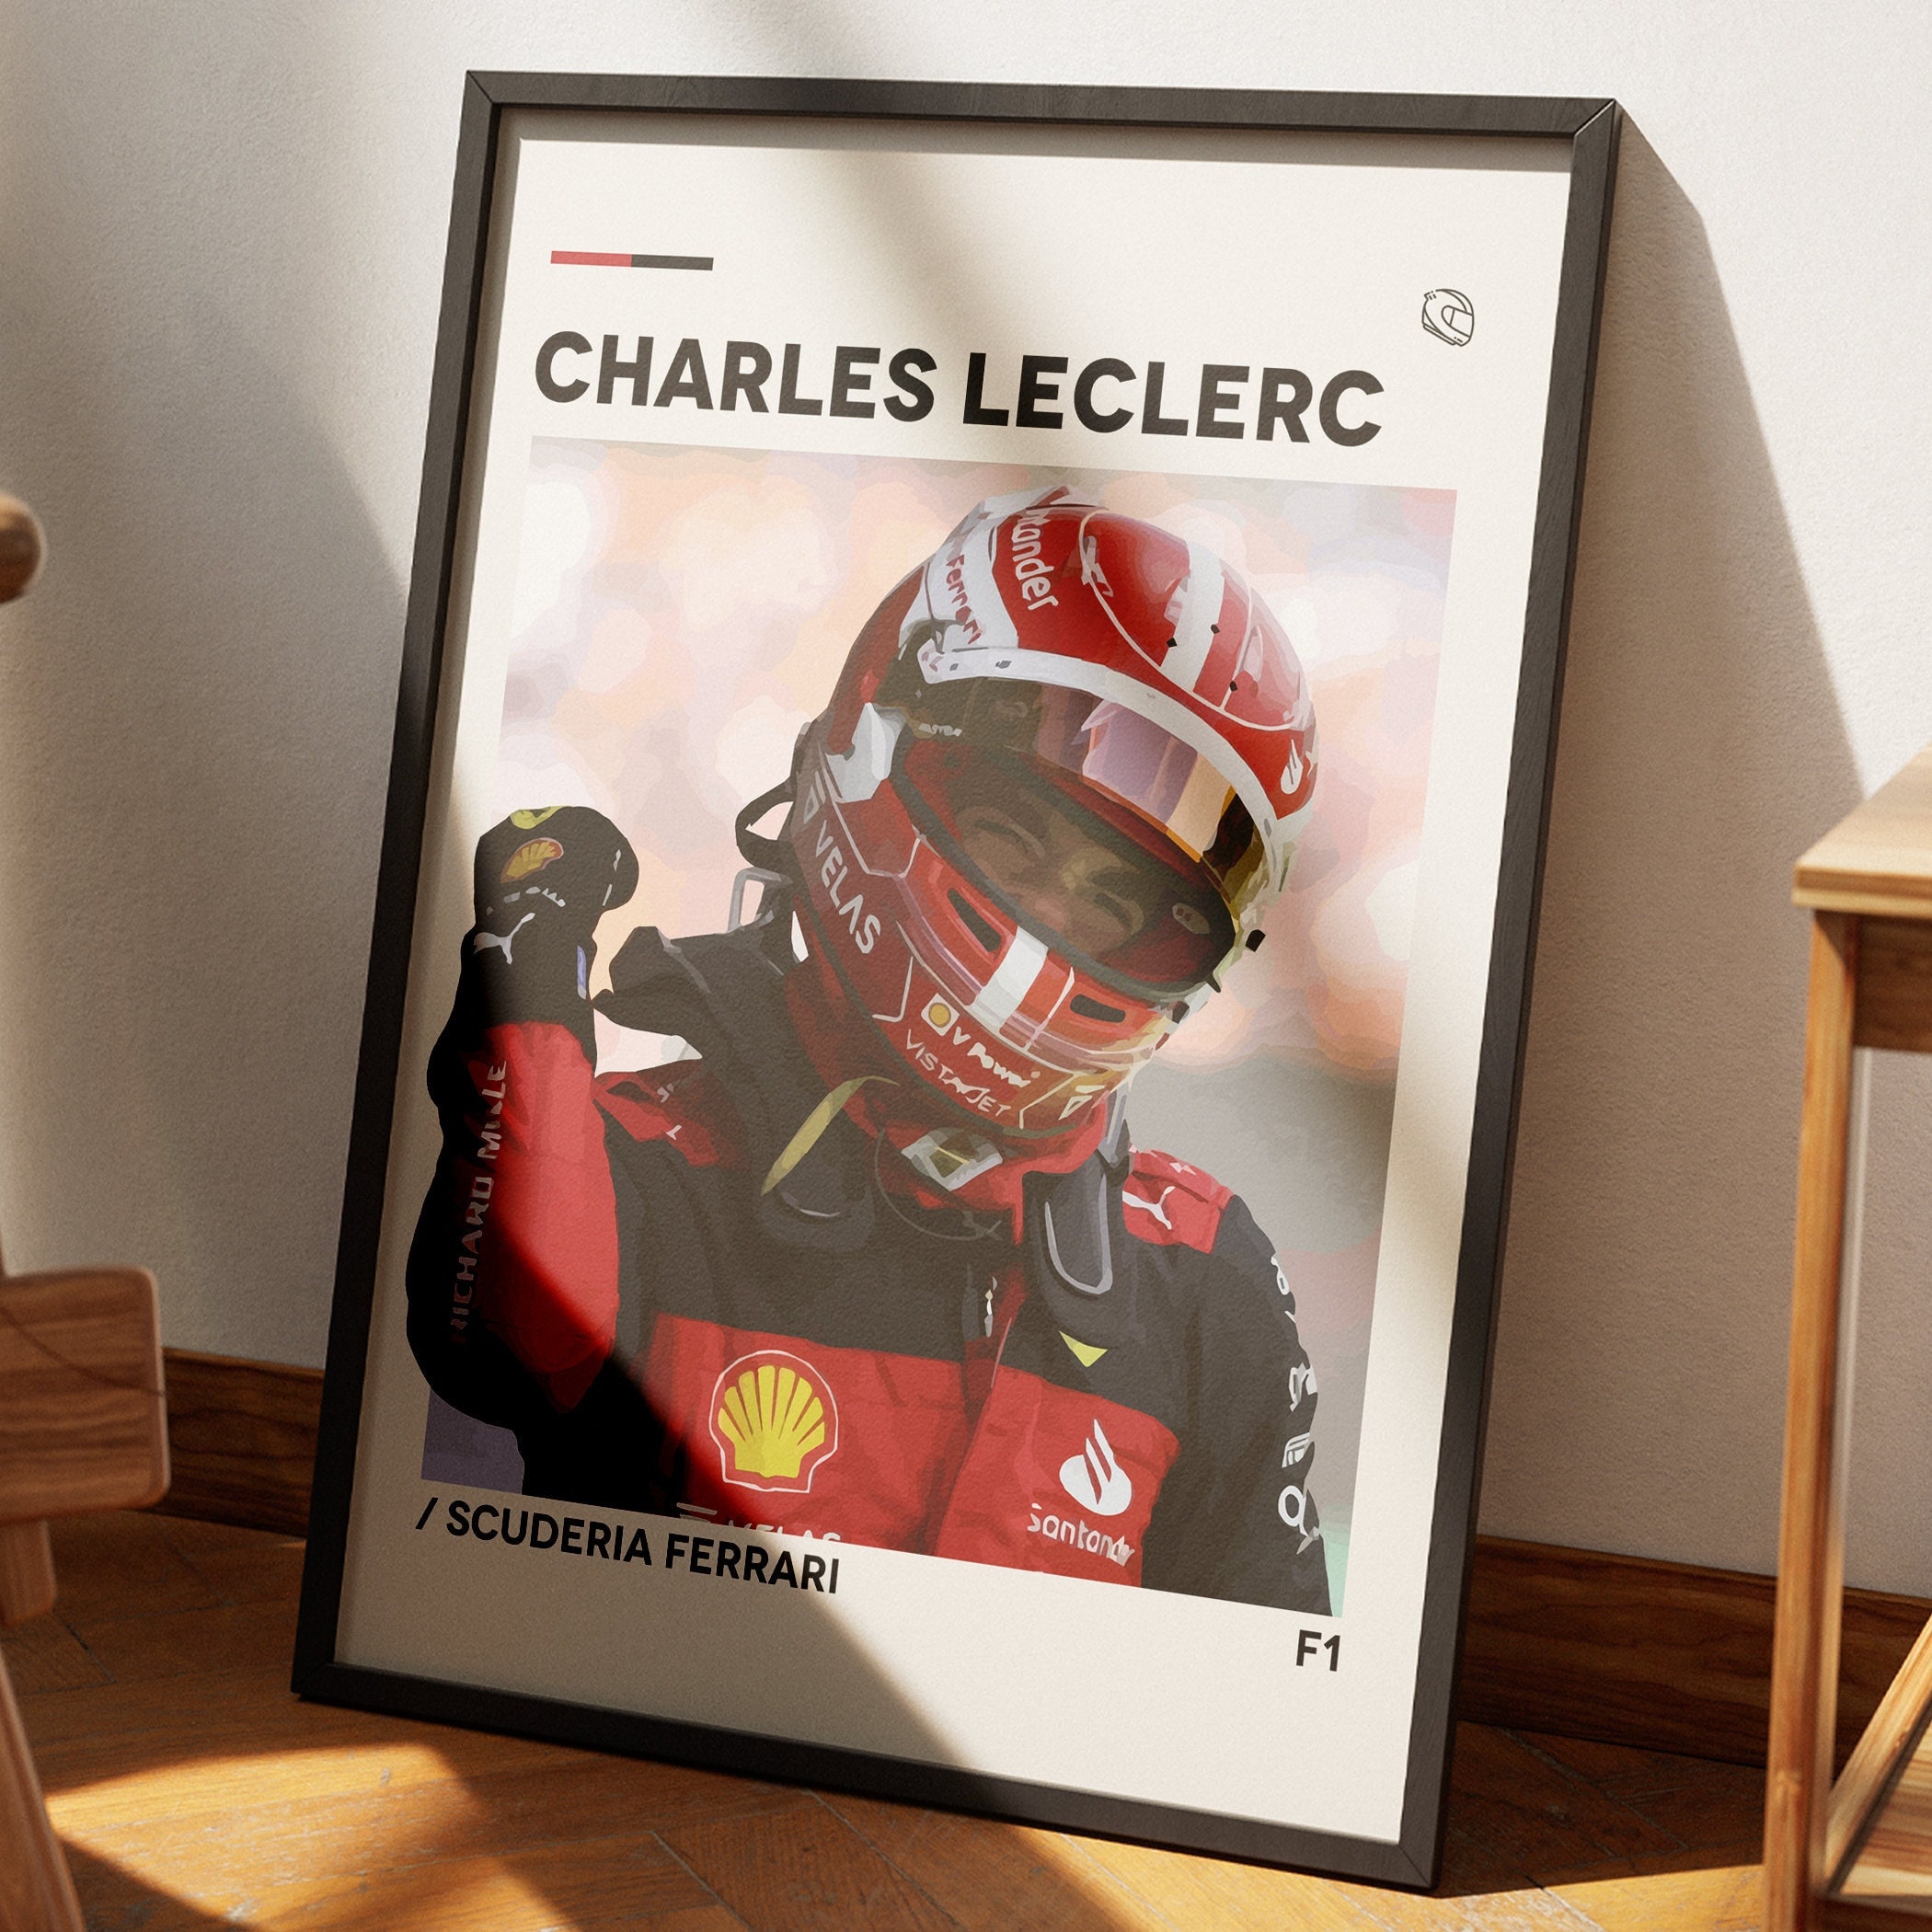 Discover Charles Leclerc Poster, F1 Racing Poster, Formula 1 Poster, Motorsports